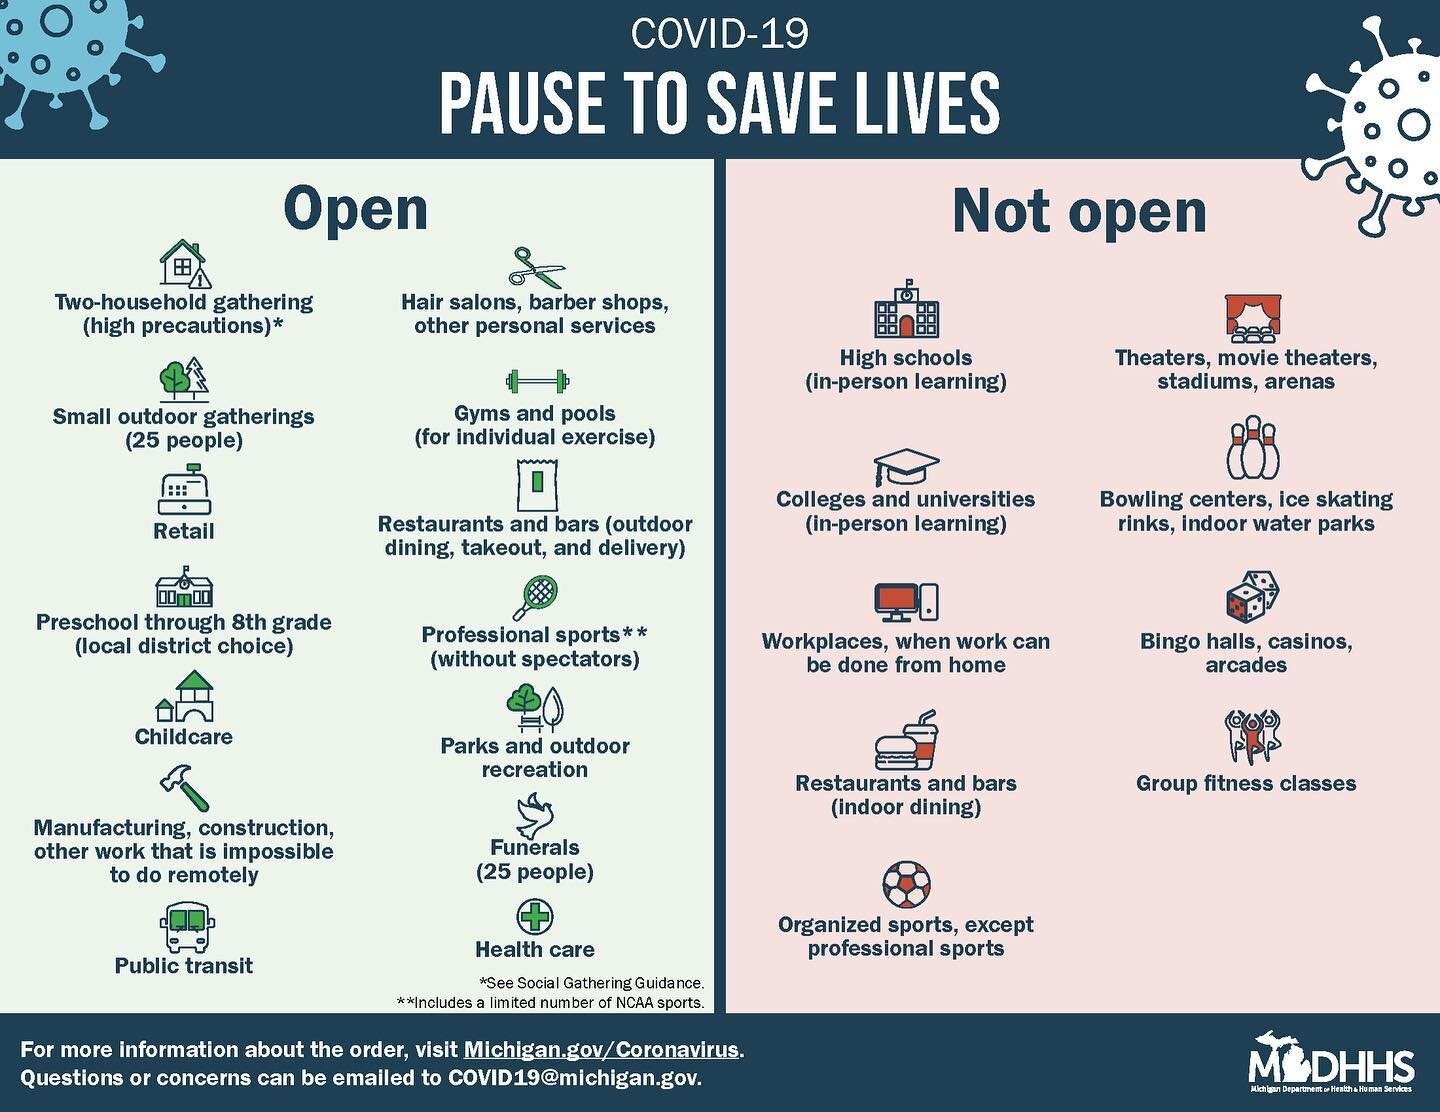 These are small sacrifices that can save thousands of loved ones across the state. Let&rsquo;s pause to save lives, y&rsquo;all.